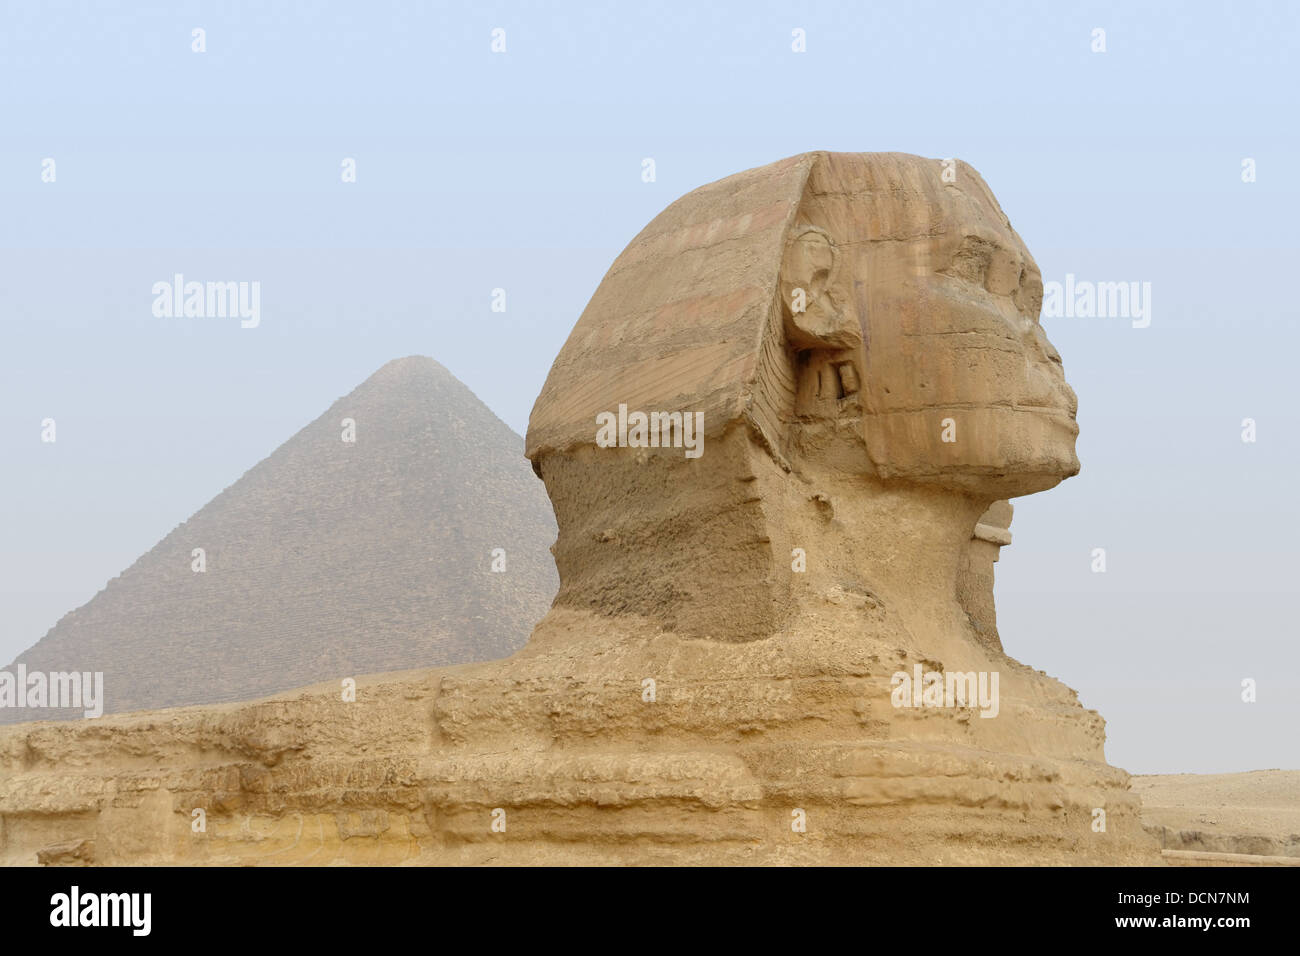 the Giza Necropolis with Great Pyramid of Giza and Sphinx Stock Photo